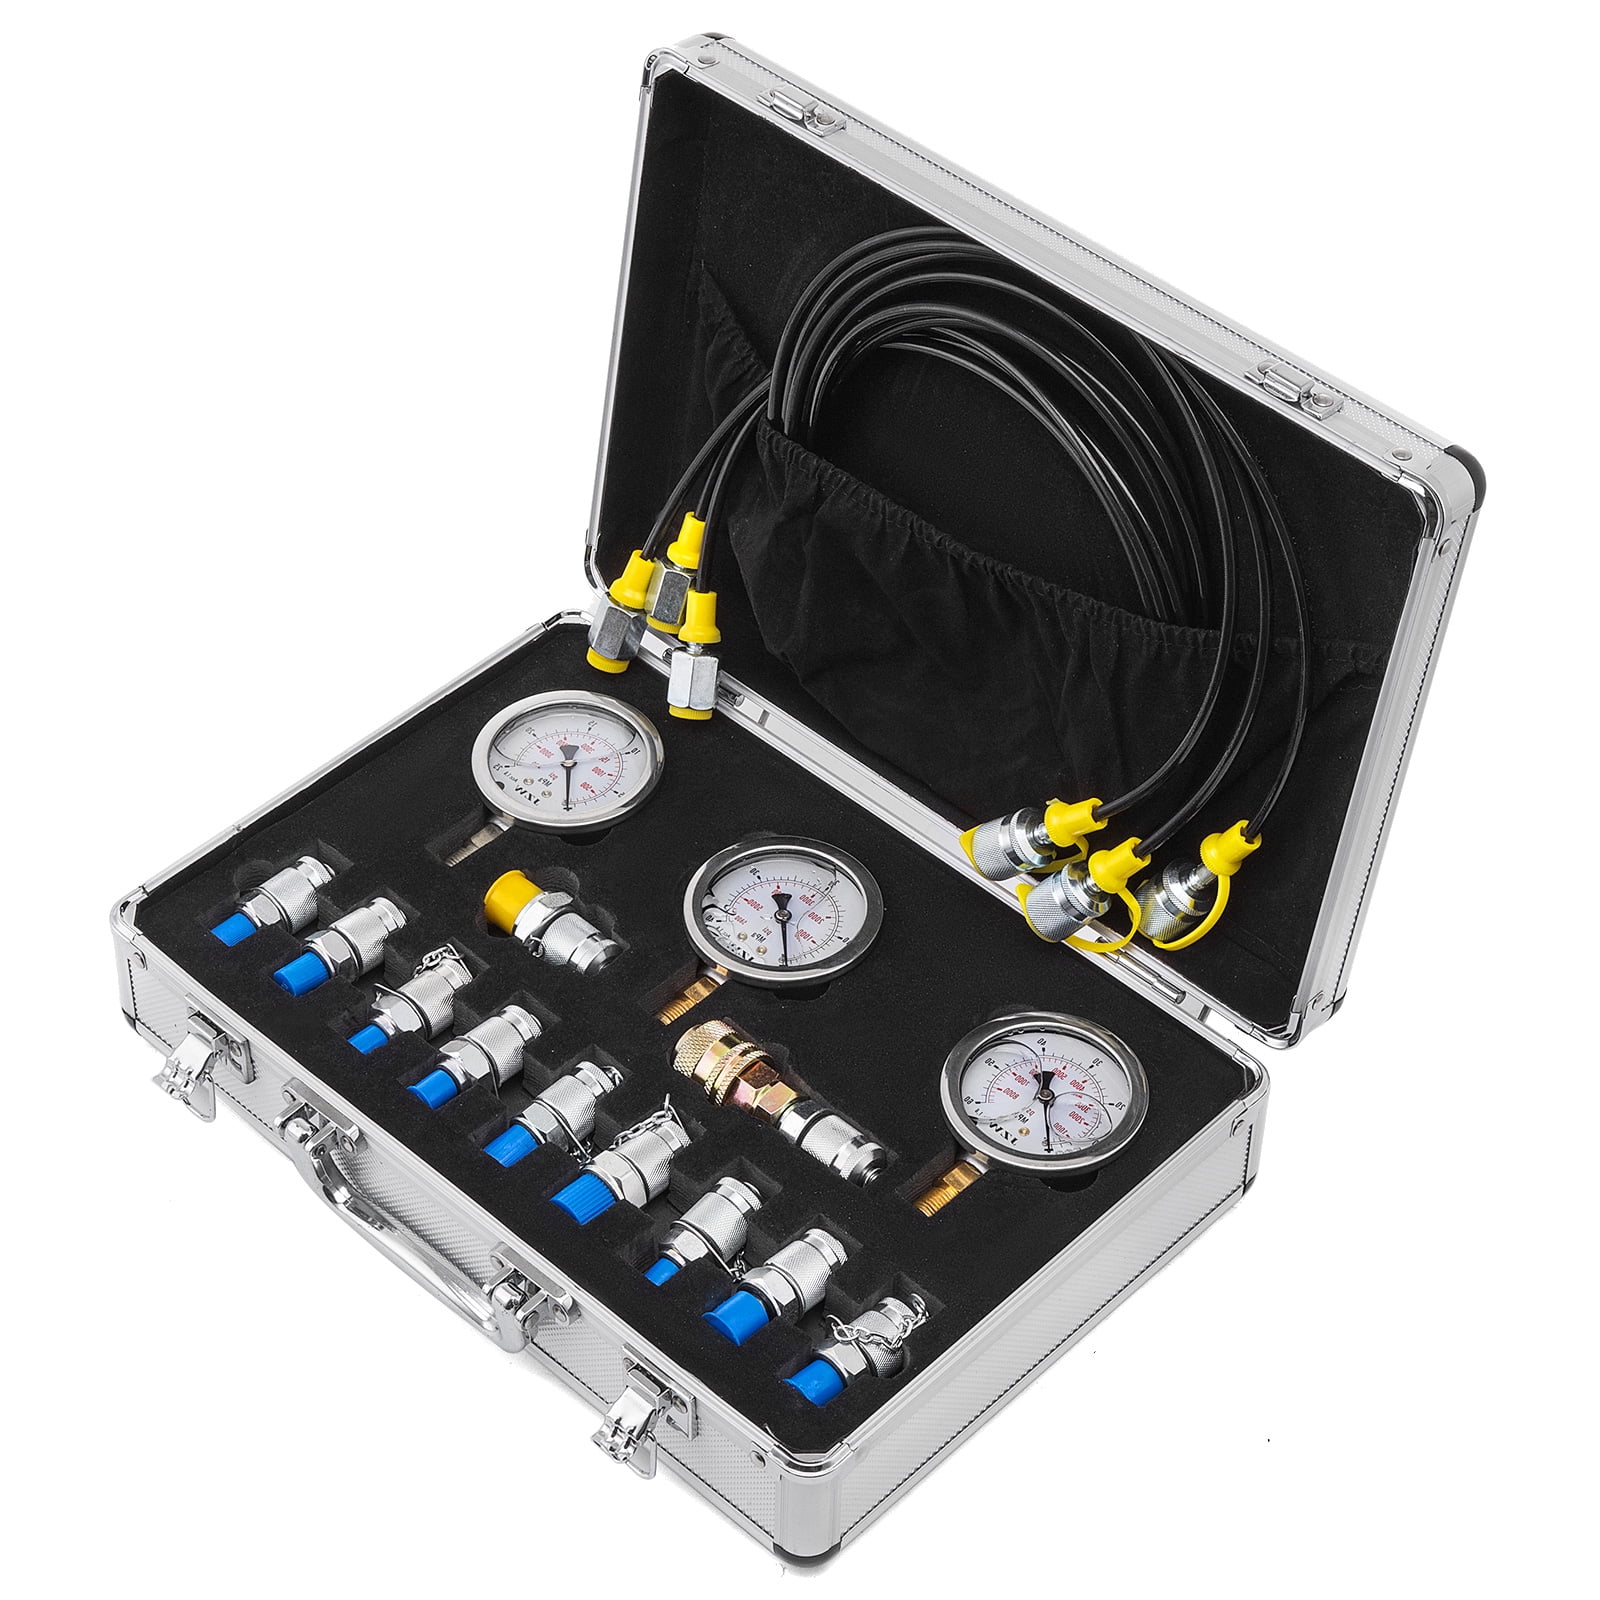 9000PSI Hydraulic Pressure Test Kit Hydraulic Pressure Tester for Machinery US 